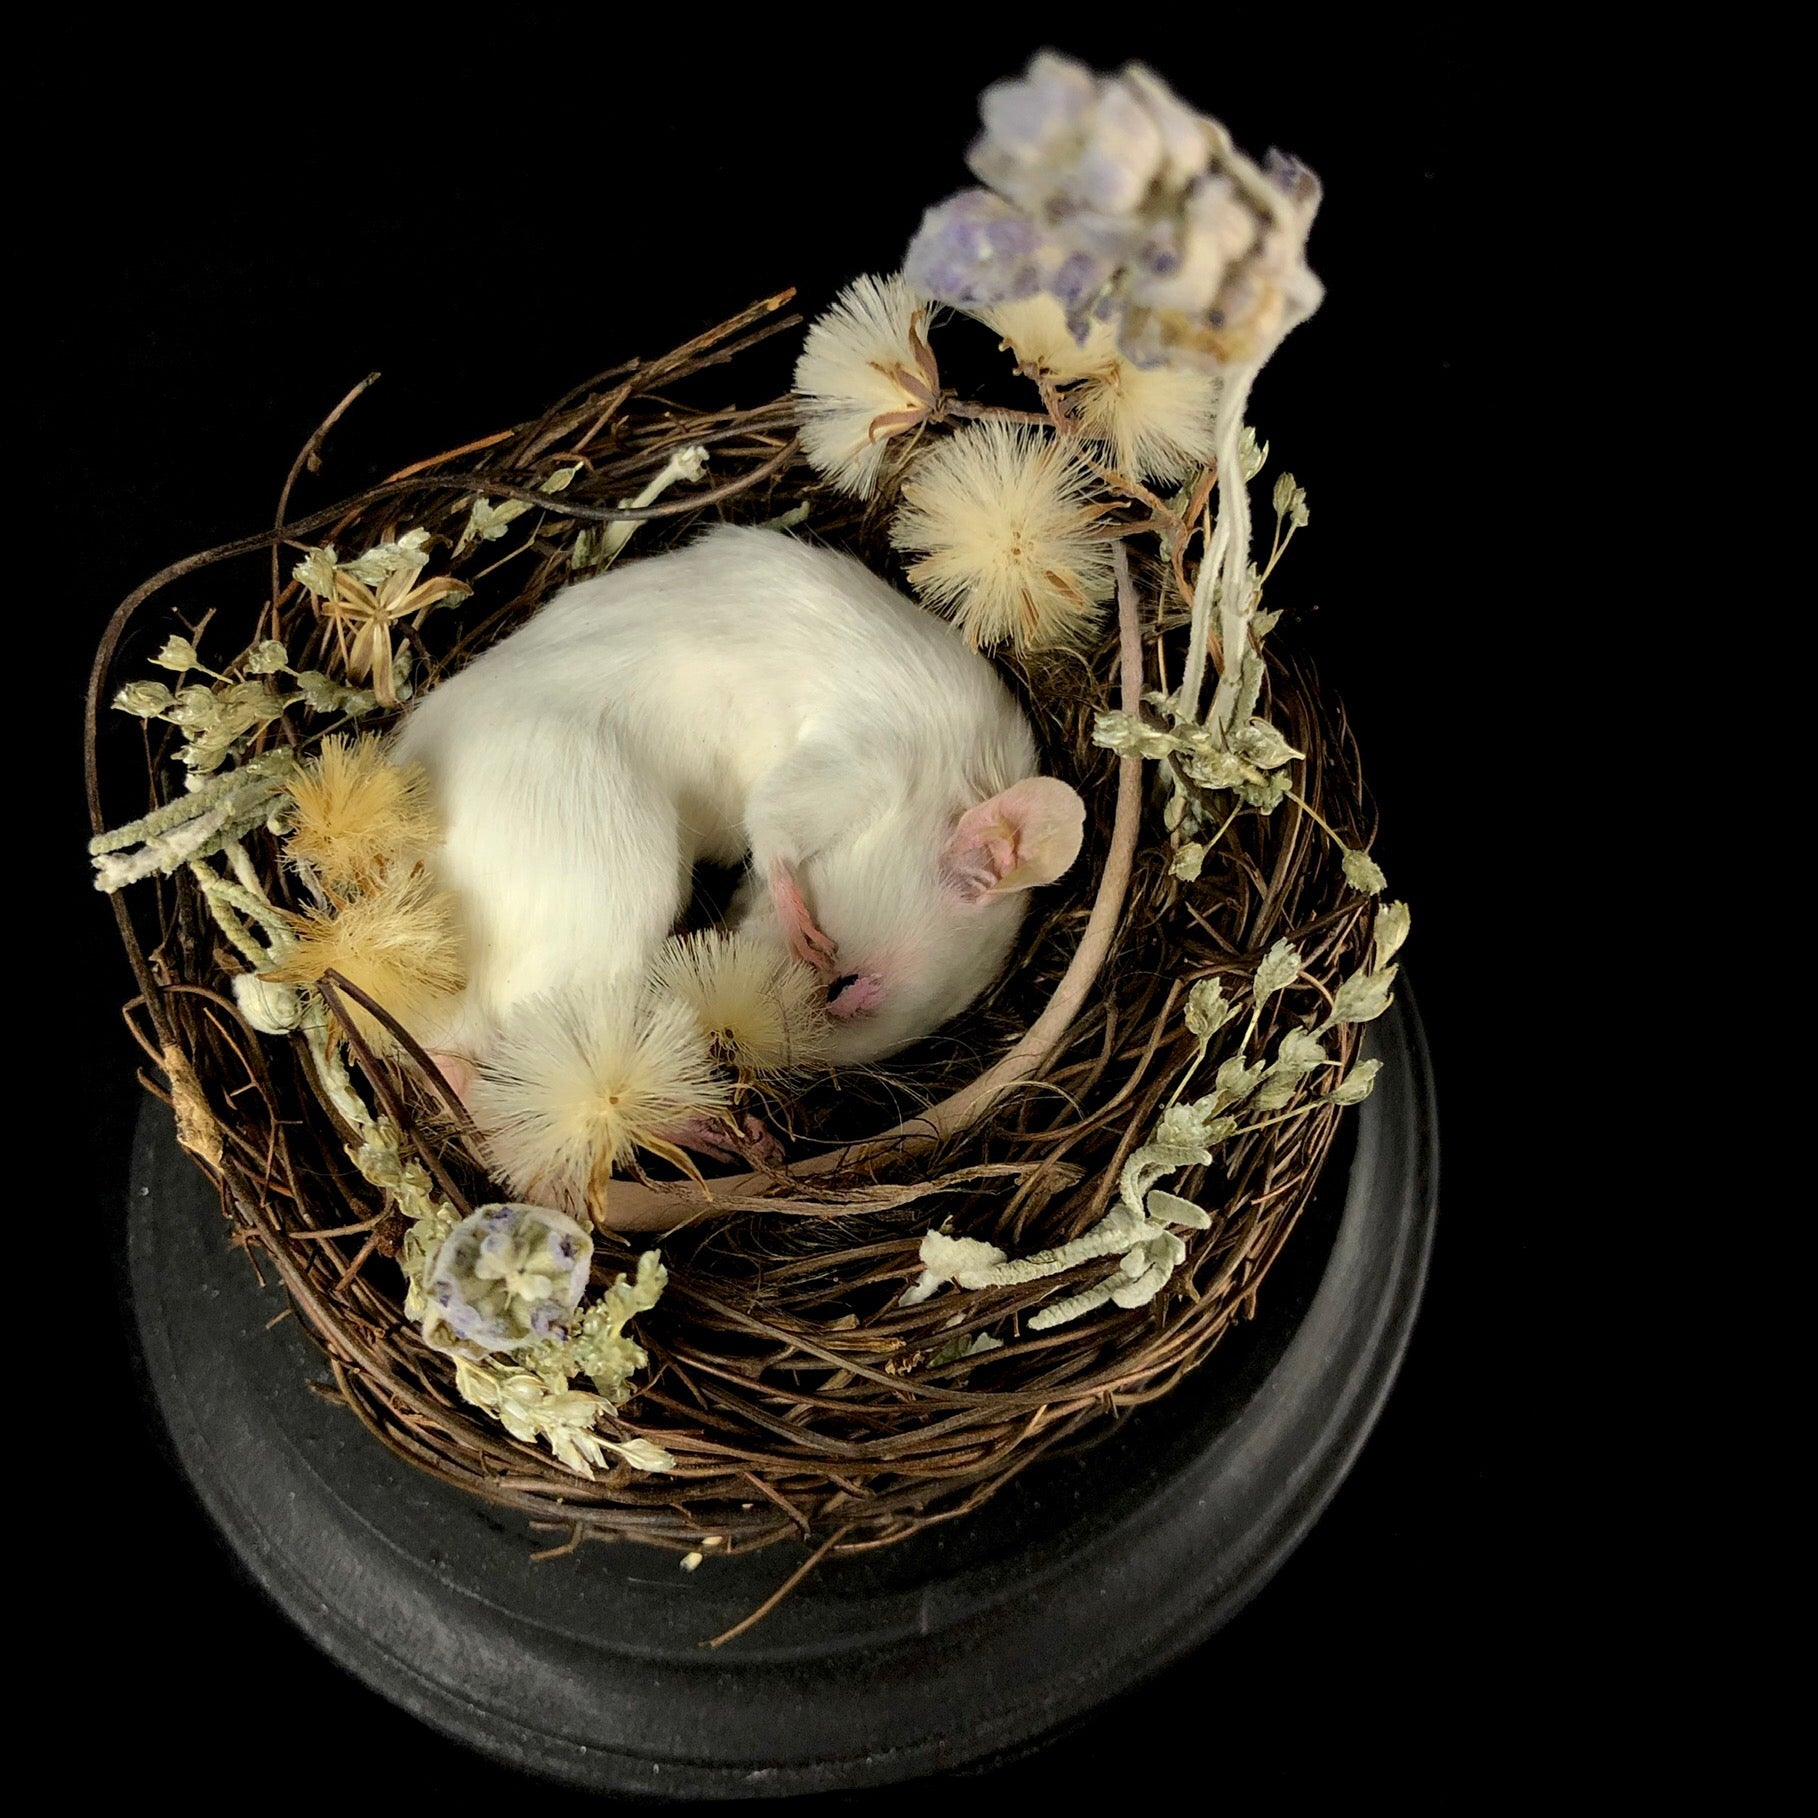 Top view of Sleeping Mouse in nest of display